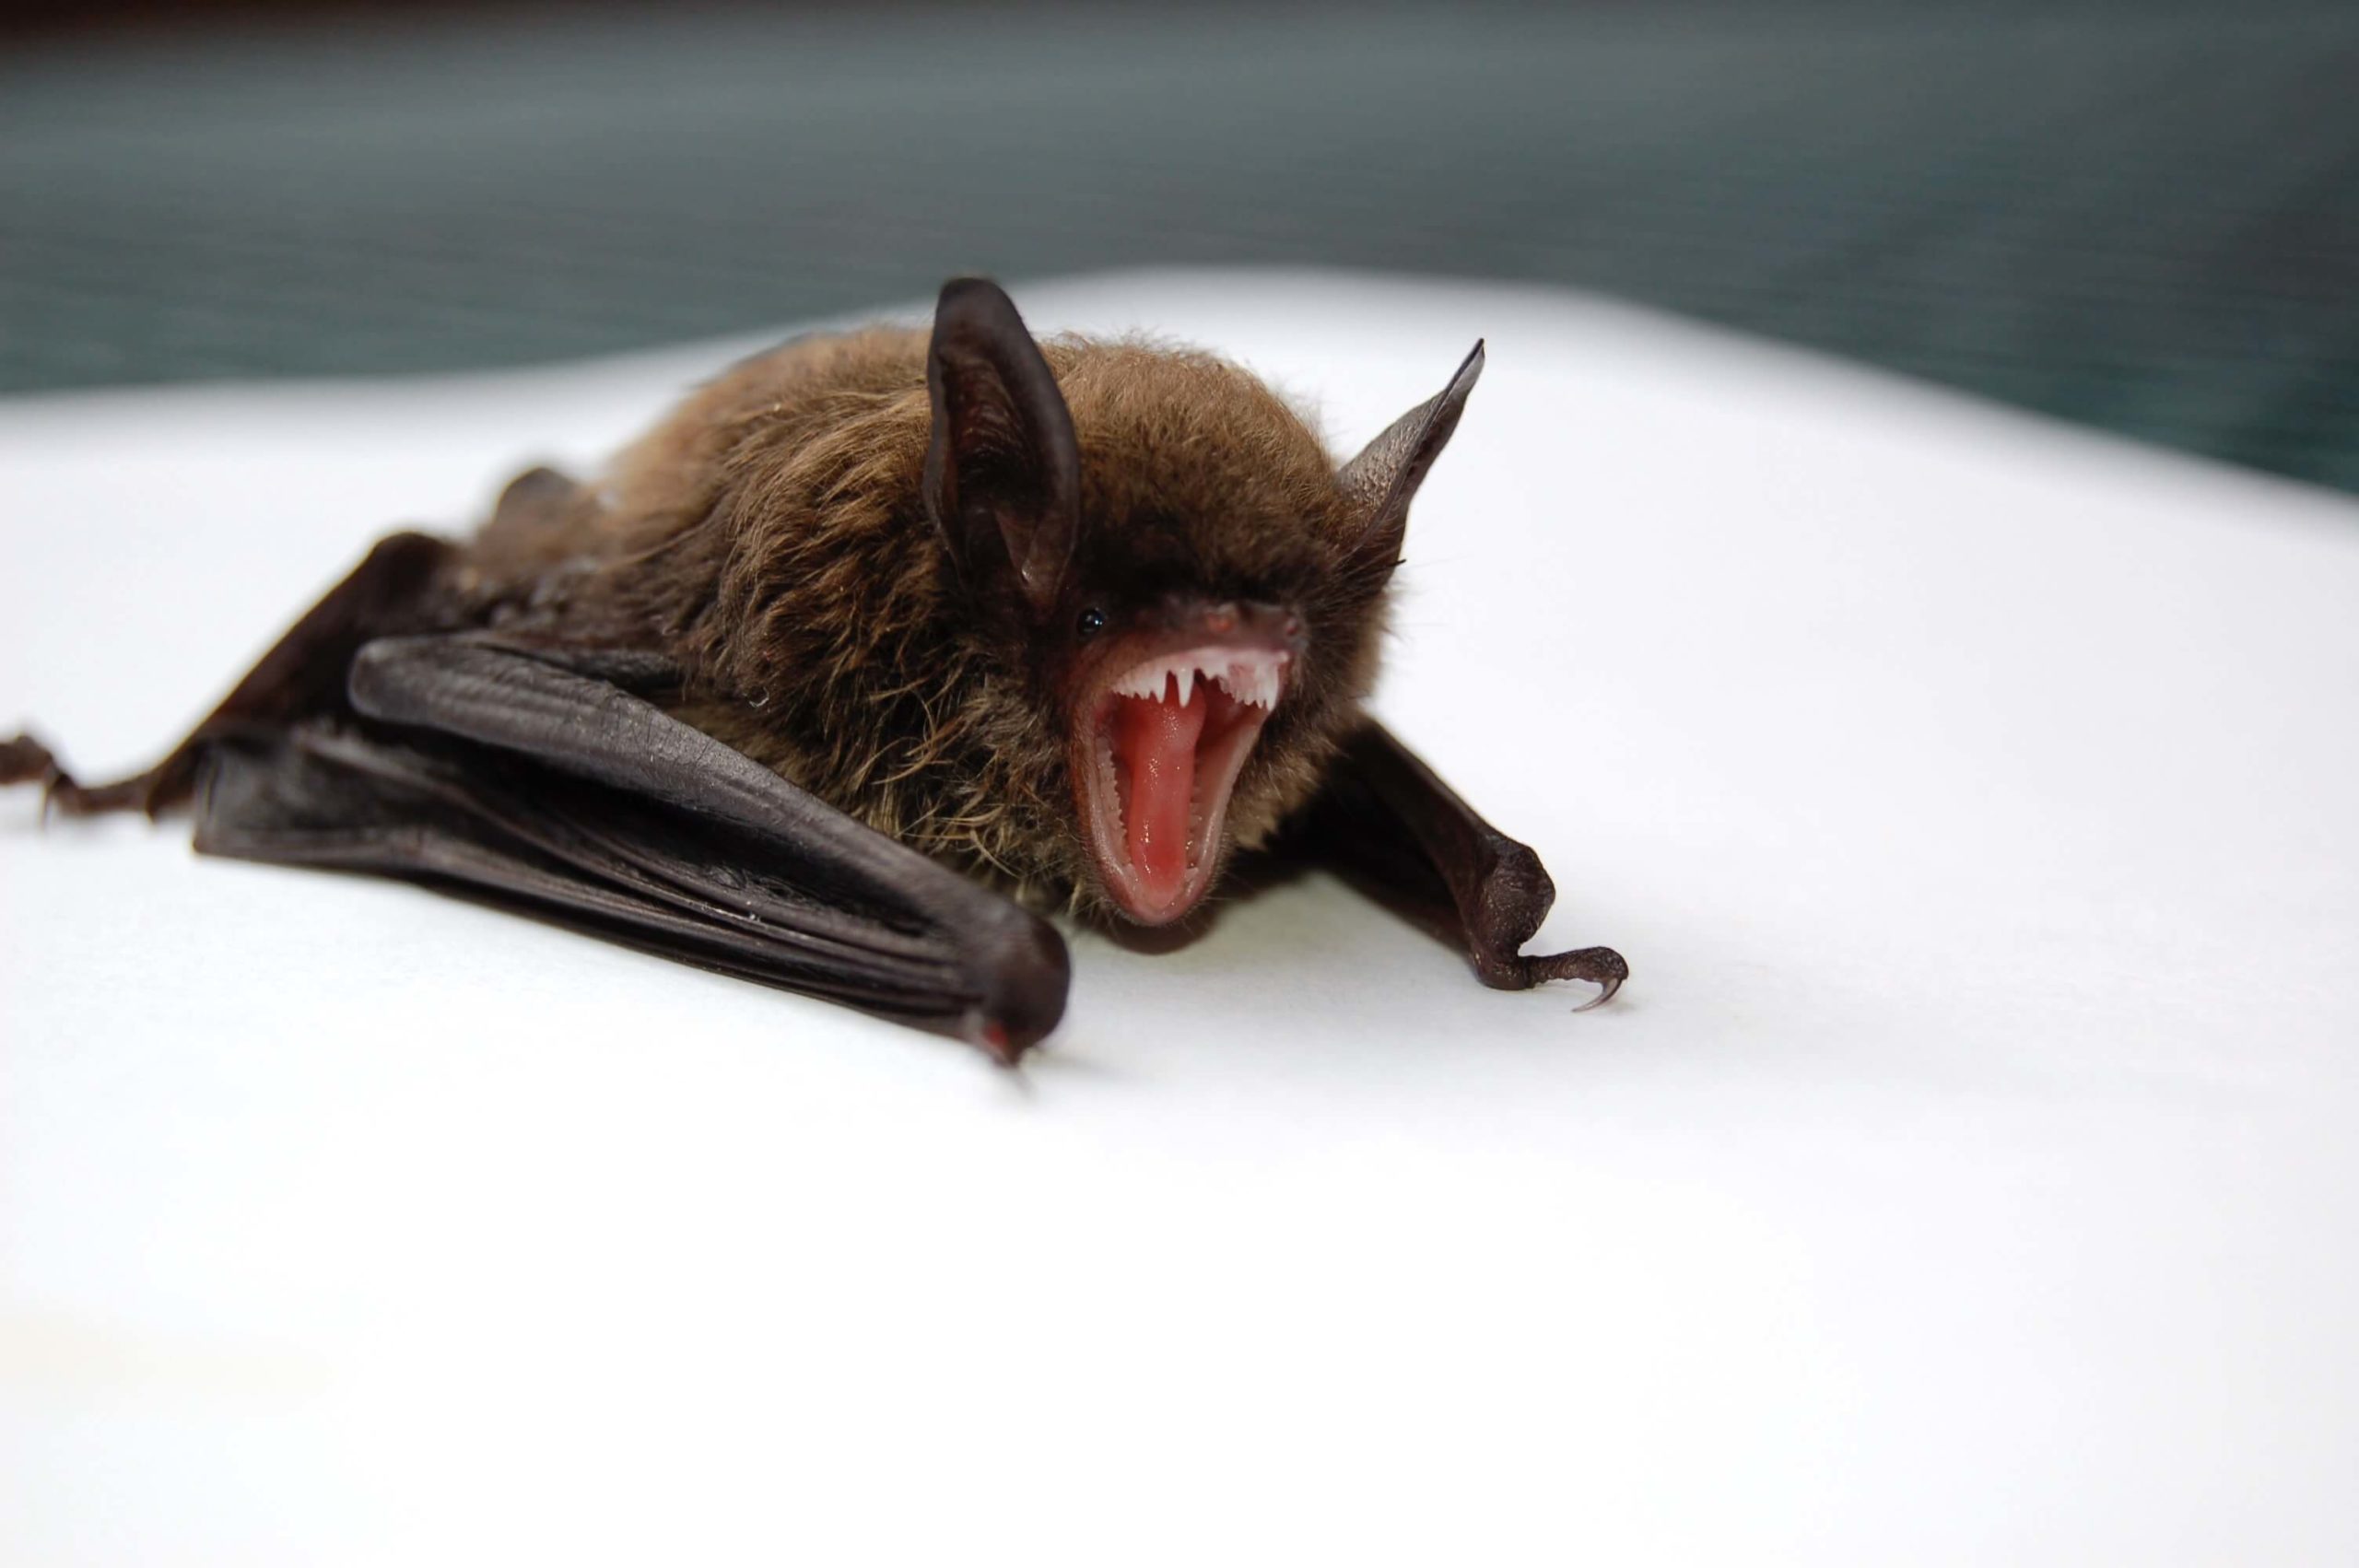 Picture of a bat, what does their poop look like?